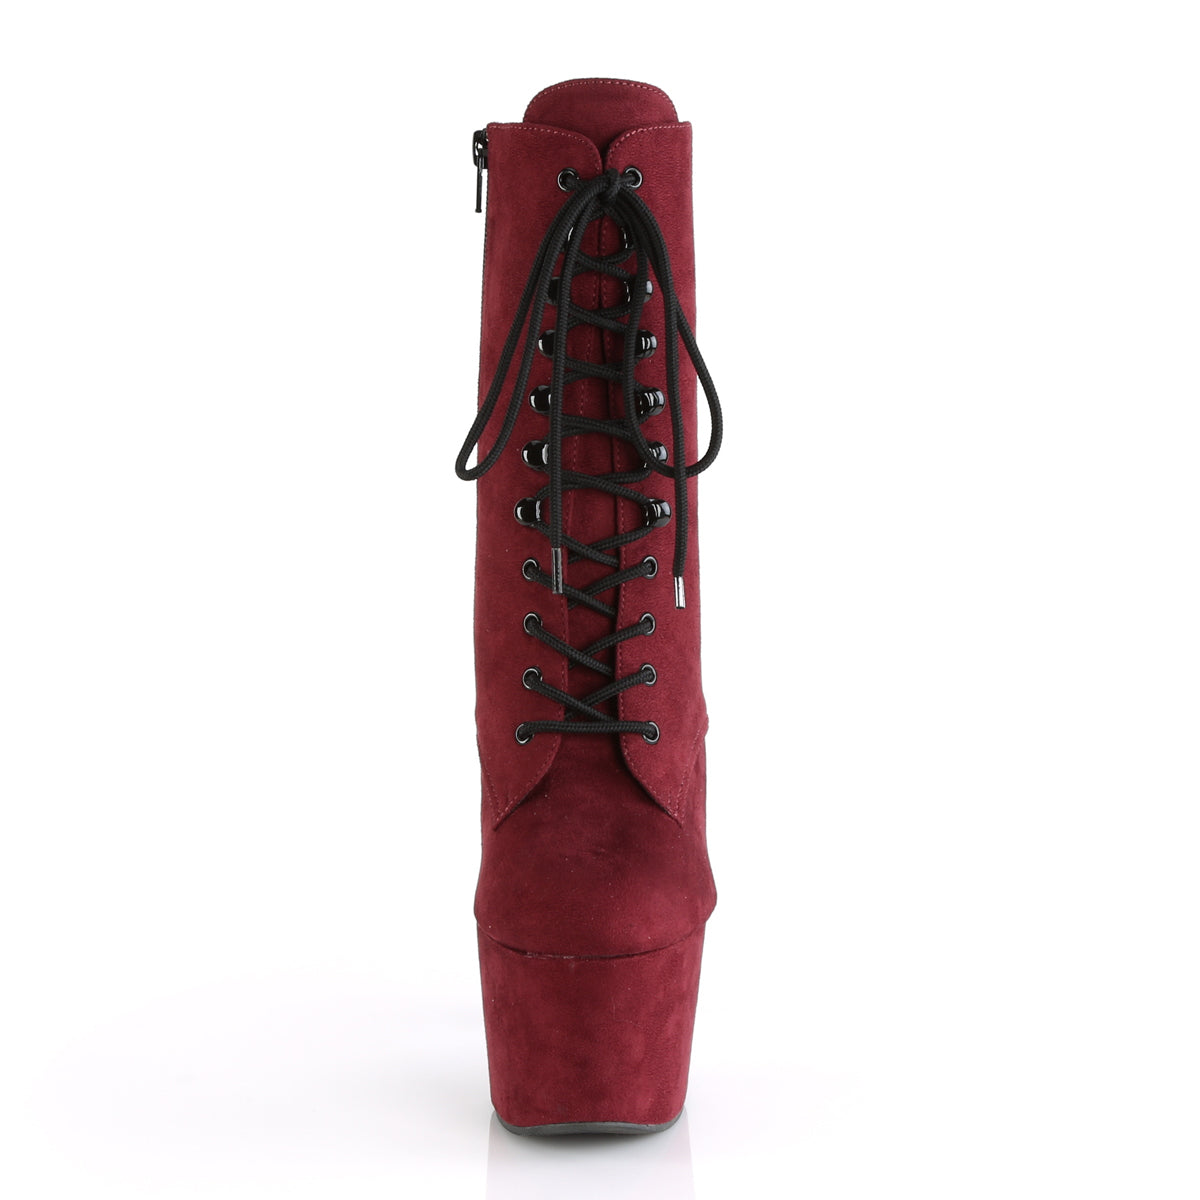 ADORE-1020FS 7 Inch Heel Burgundy Exotic Dancing Ankle Boots-Pleaser- Sexy Shoes Alternative Footwear